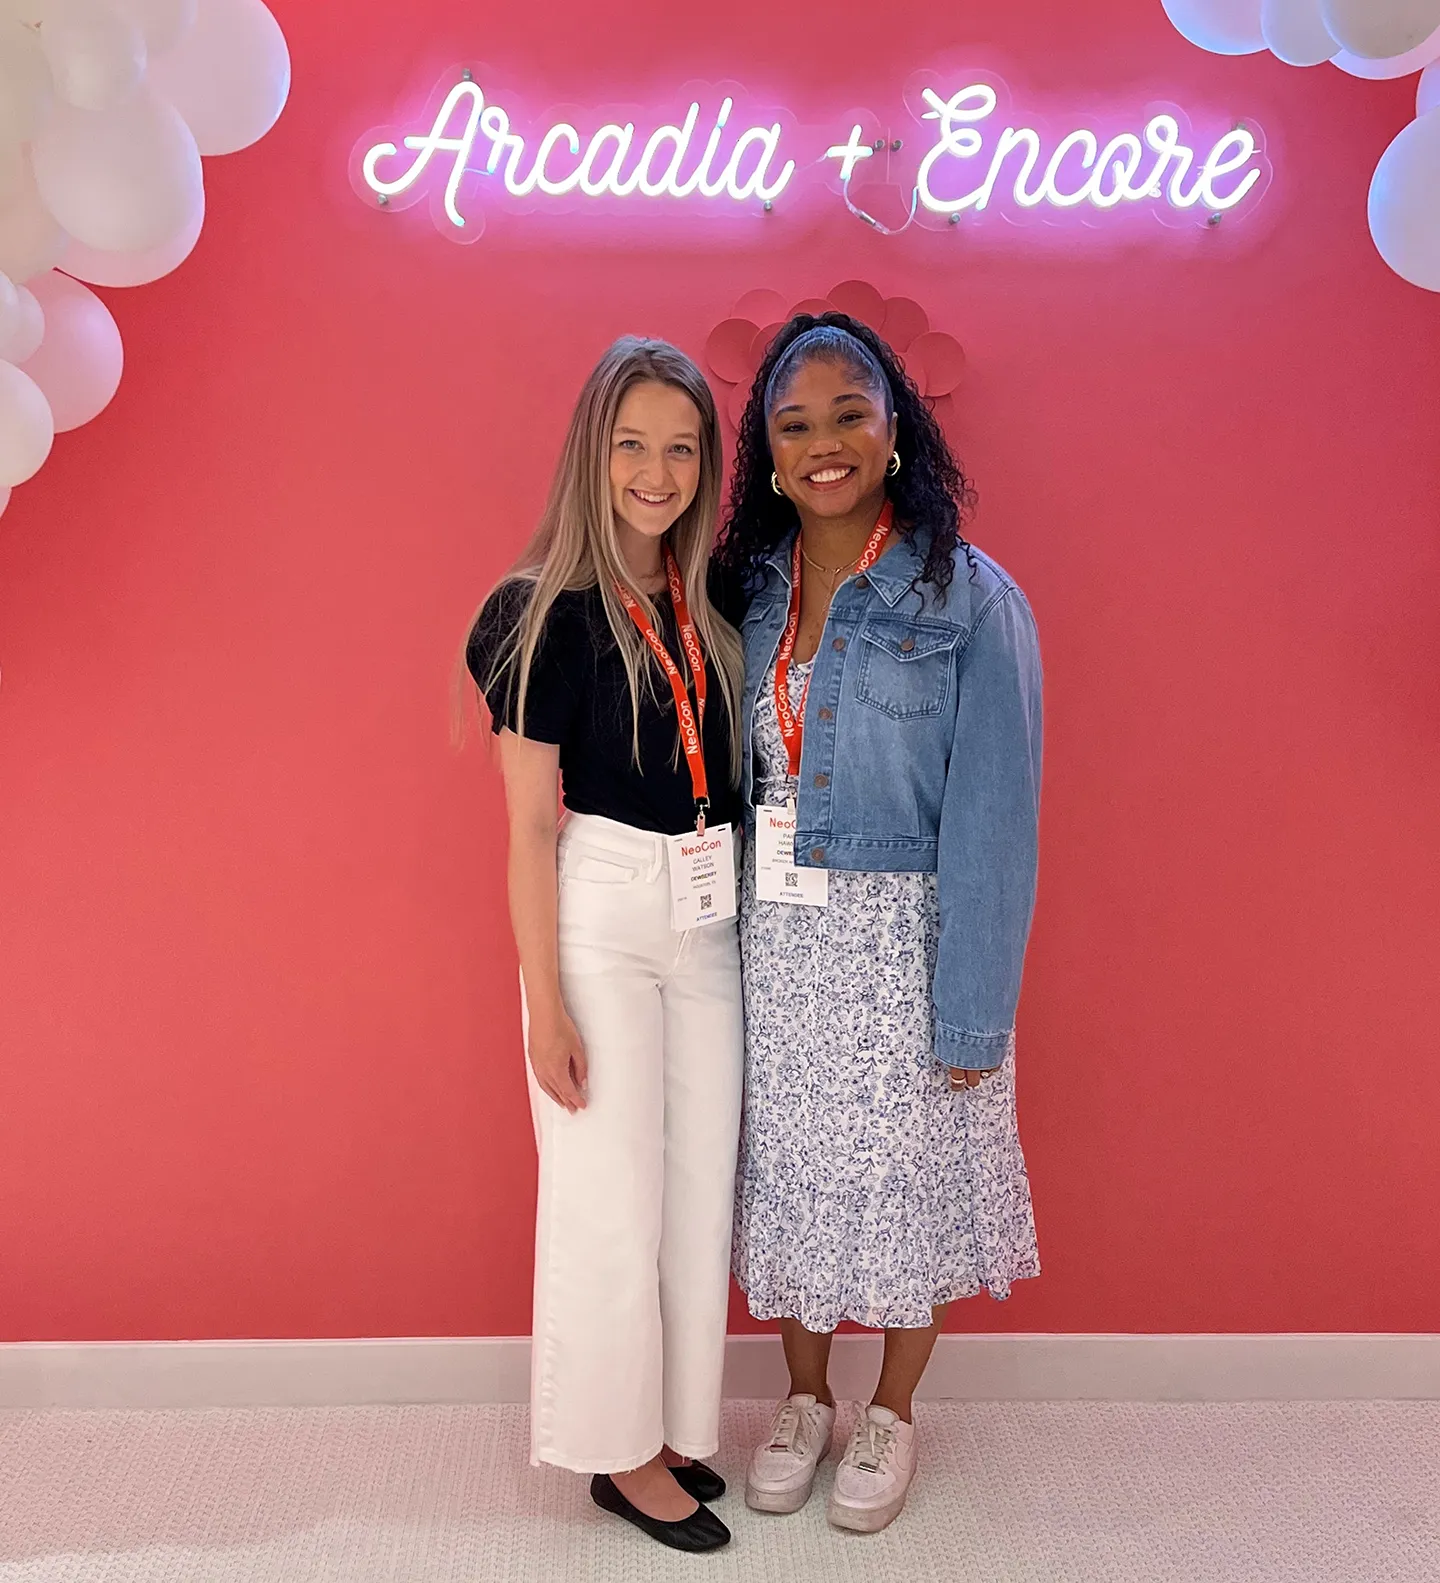 Calley Watson (left) and Paige Hawkins (right) at the Arcadia showroom on day one of Neocon.